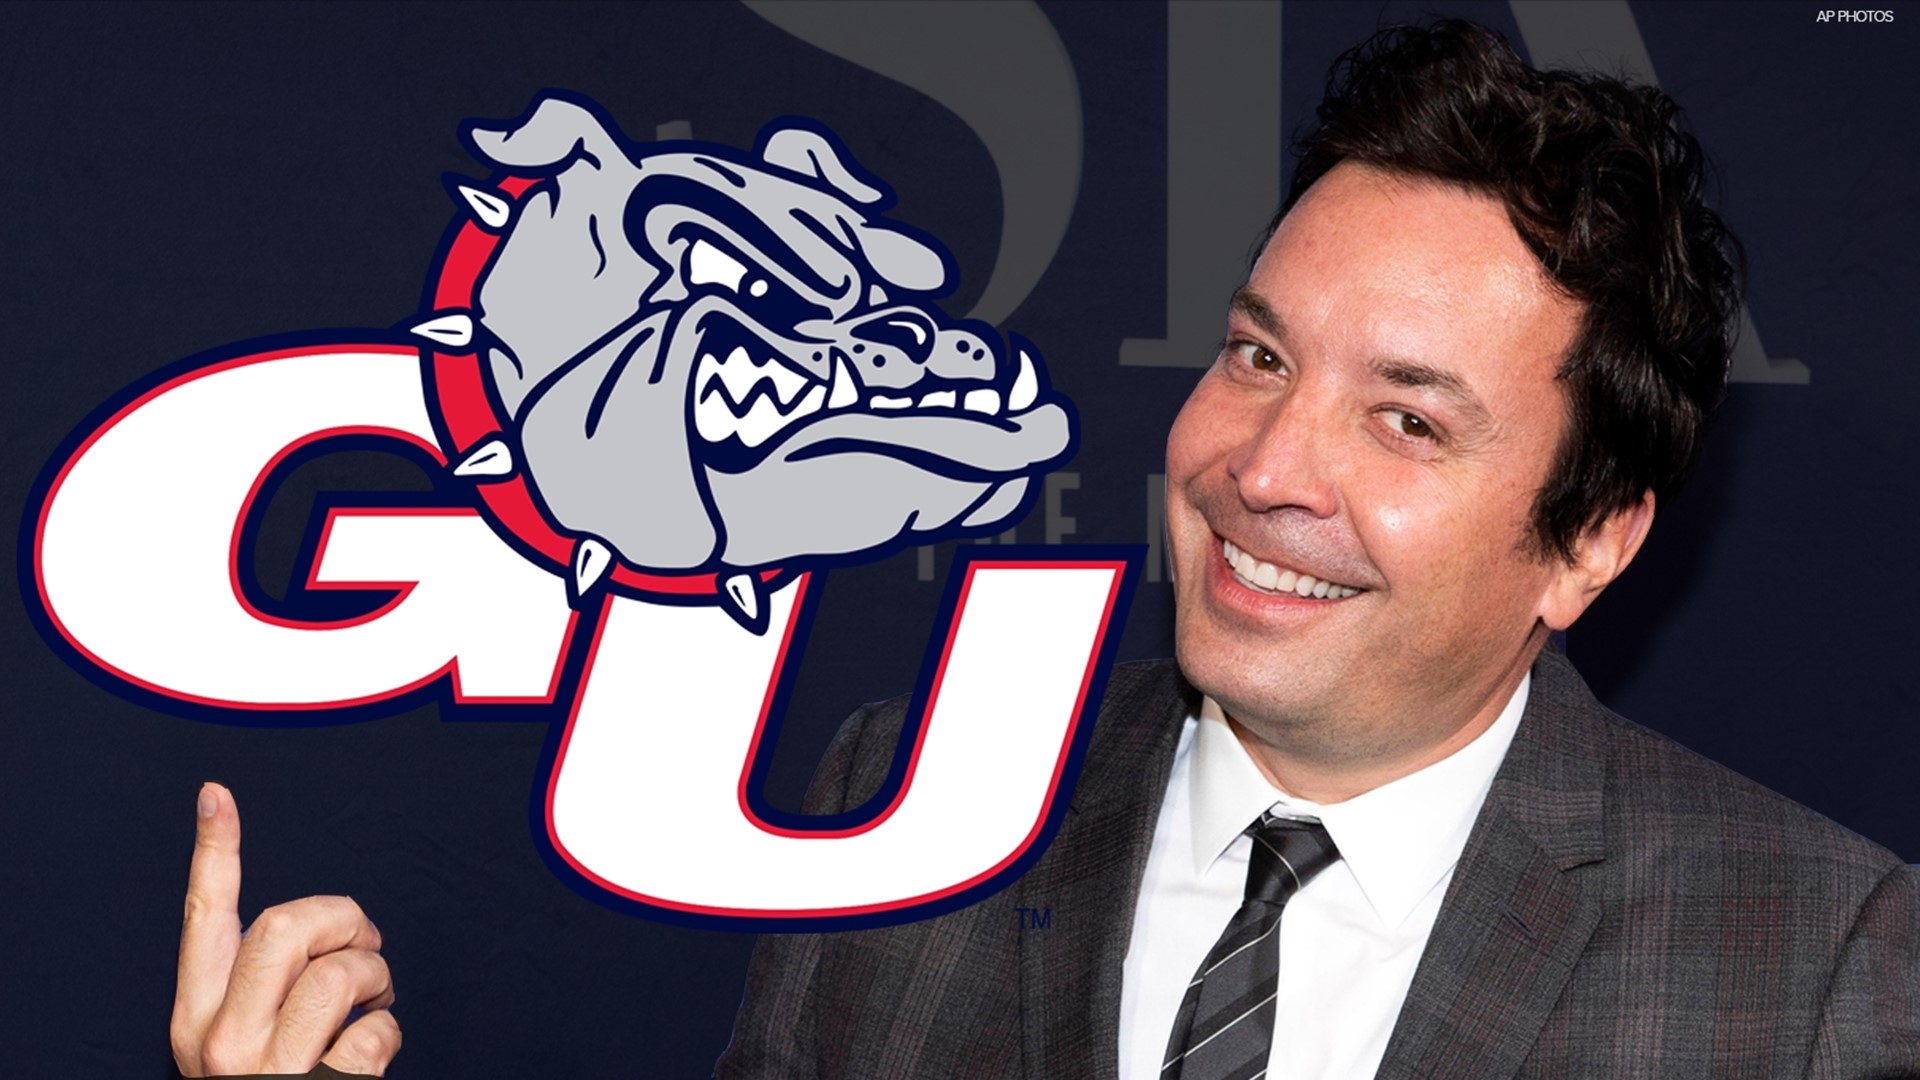 Tonight Show host Jimmy Fallon said "Gonzaga is gonna go all the way," as he revealed a mid-game scheme he hopes to pull off with the help of Gonzaga fans.